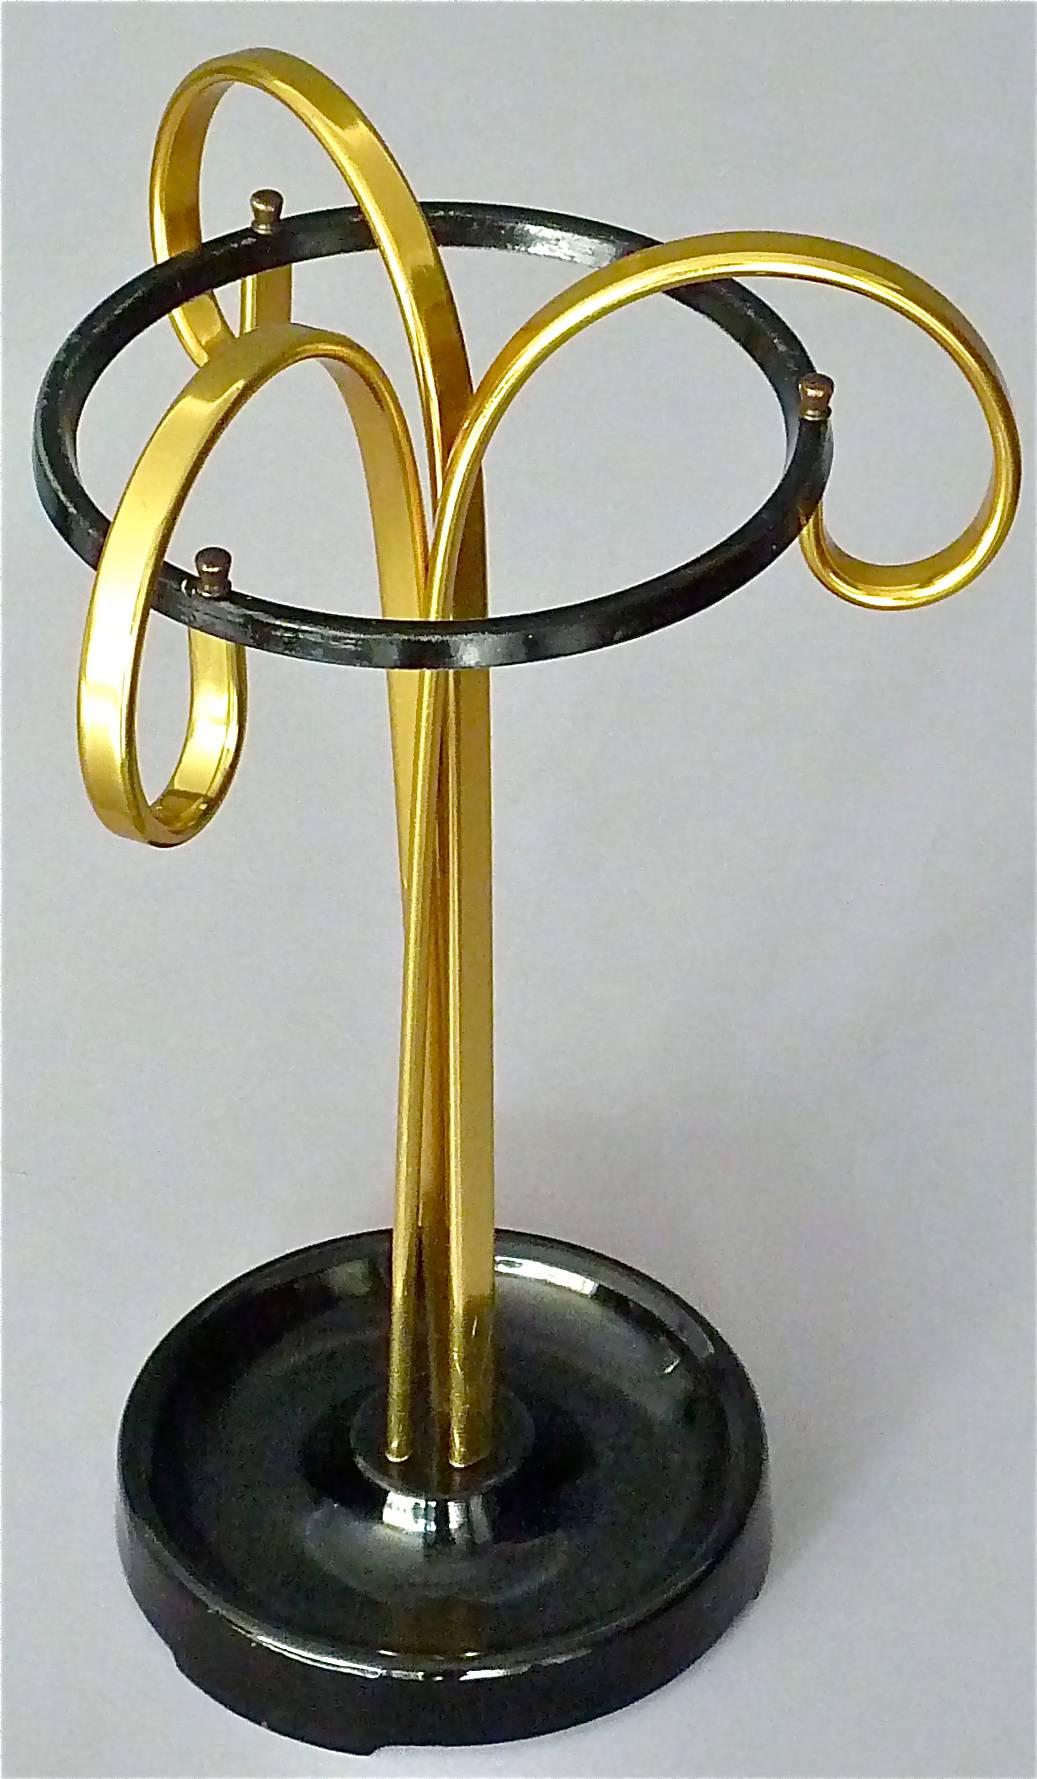 Unusual sculptural midcentury umbrella stand designed and executed in the 1950s probably in Germany, Austria or Italy. It is made of three golden color anodized aluminum metal rods which are up-going slightly twisted, ending scrolled and holding a